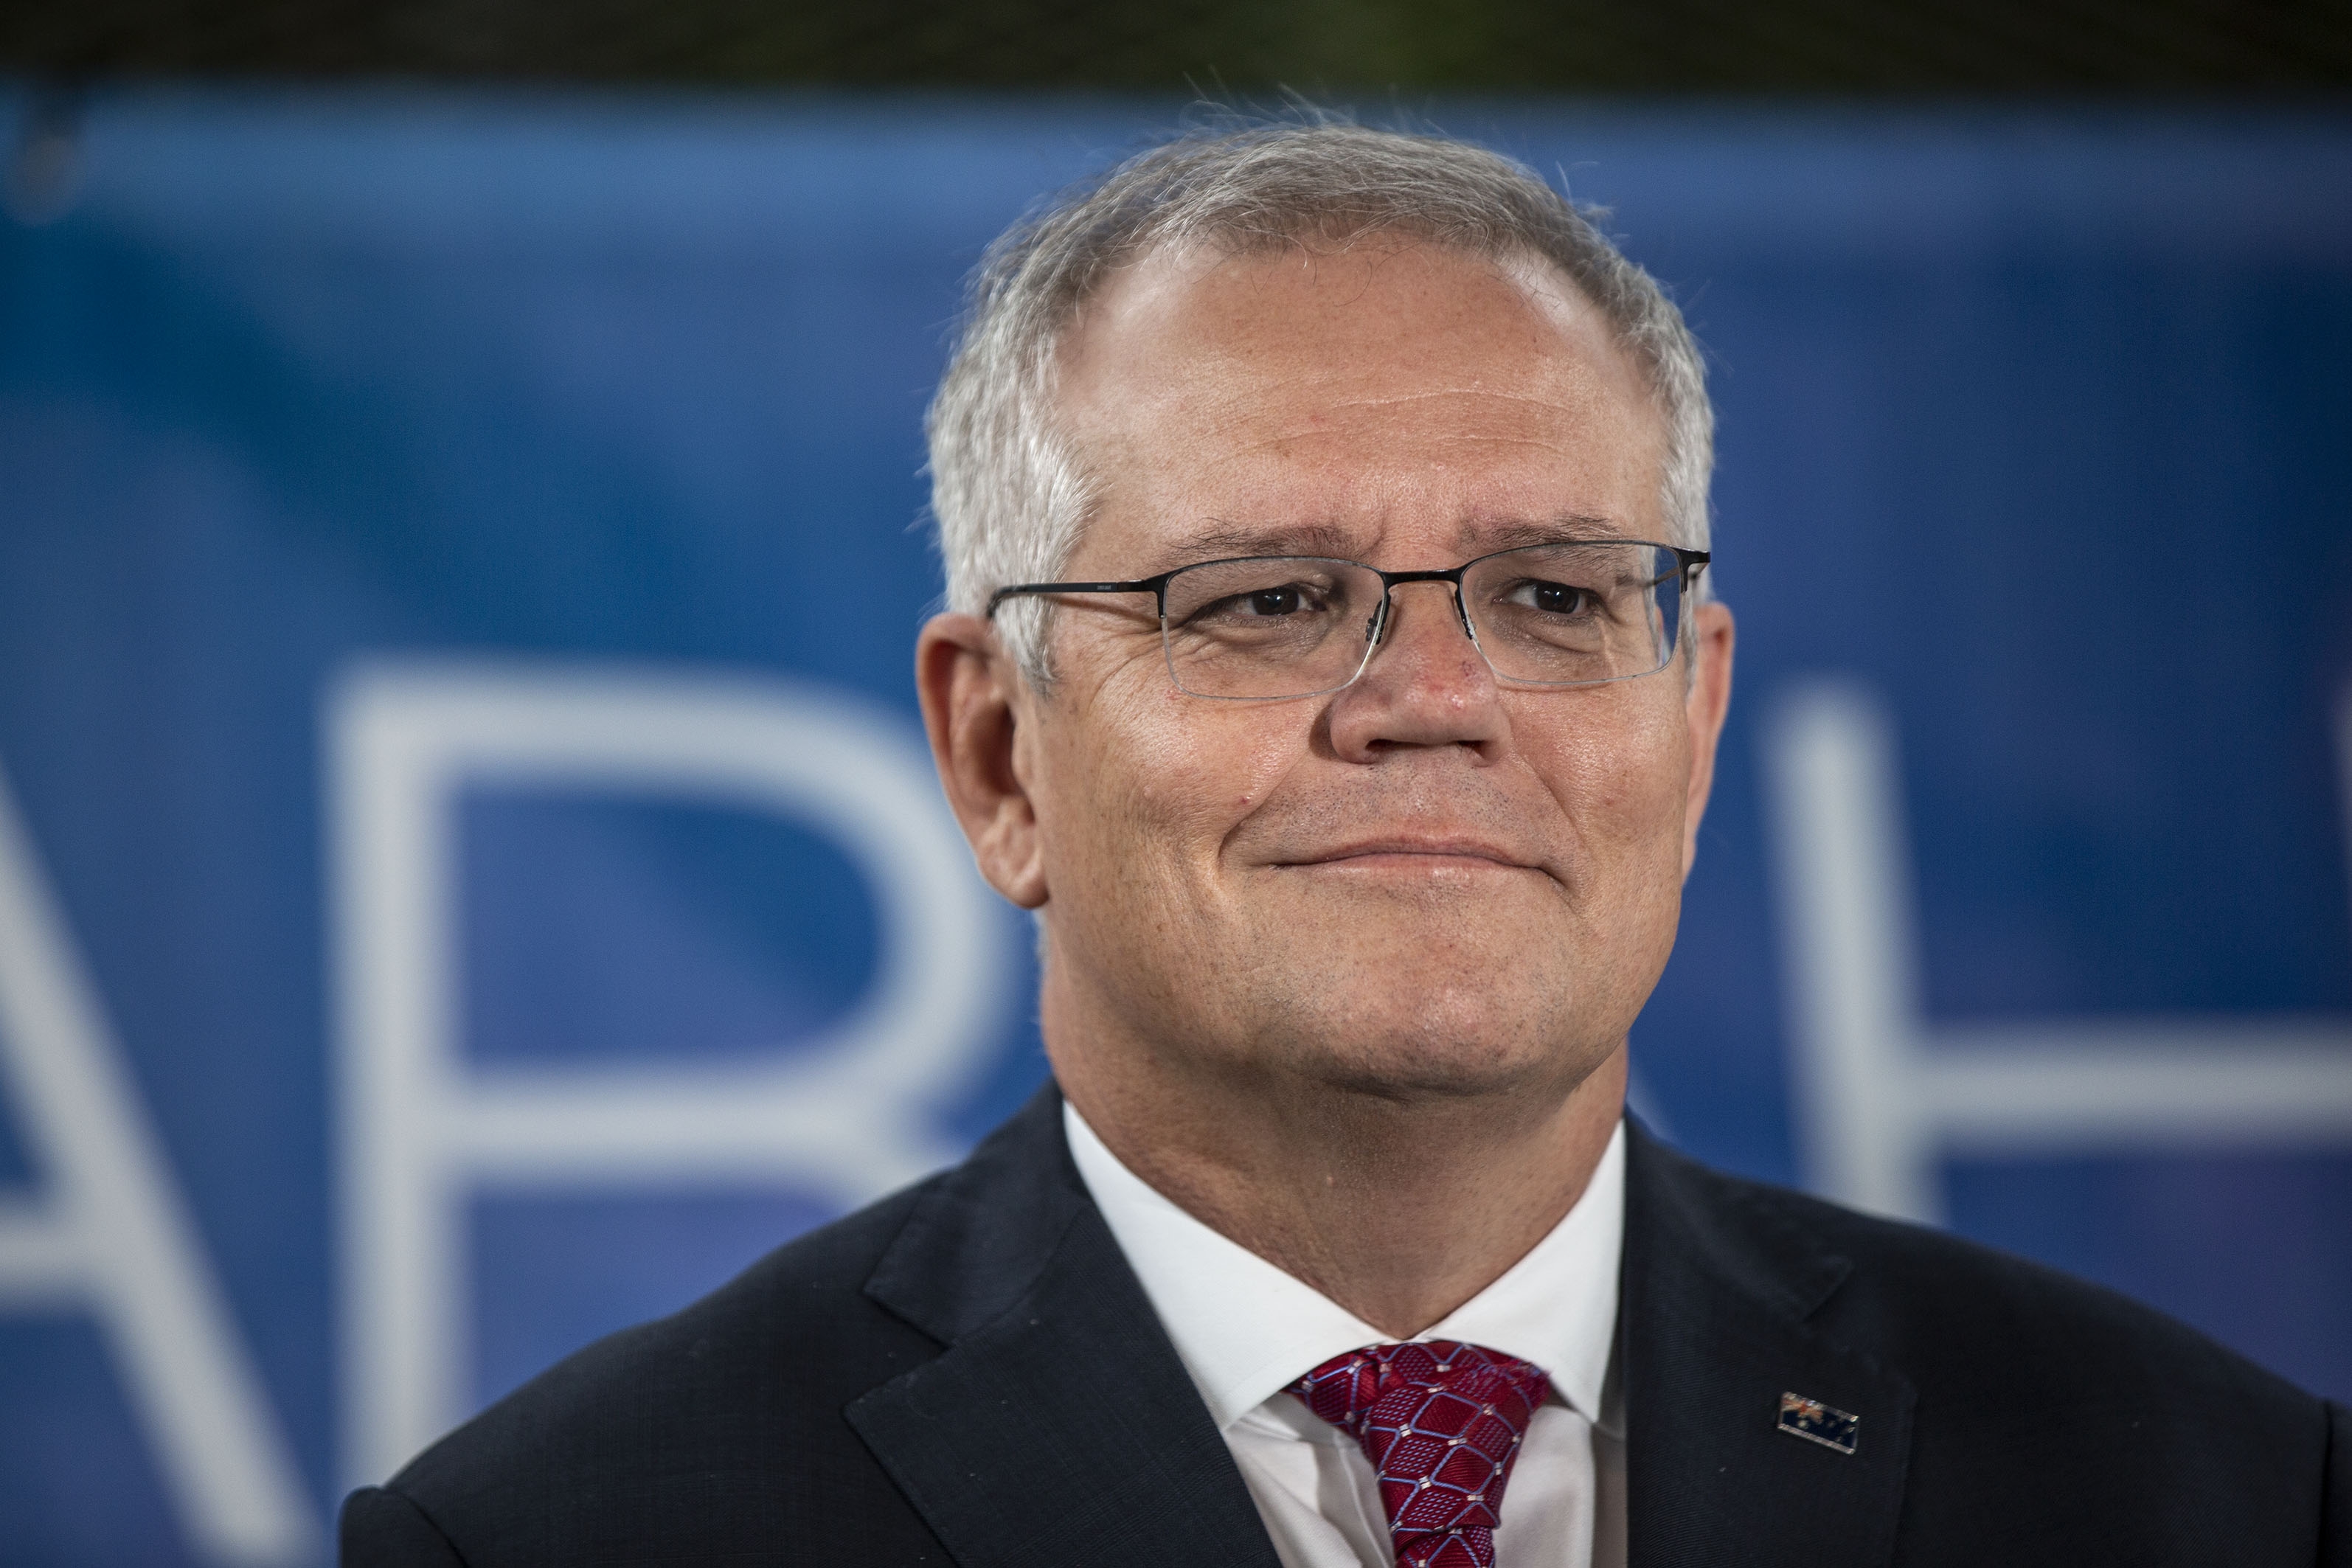 Prime Minister Scott Morrison vists the South Windsor RSL, to meet the party faithfuls and support Sarah  Richards the Liberal candidate for Macquarie, Windsor, Sydney, 20 December 2021. Photo Jessica Hromas